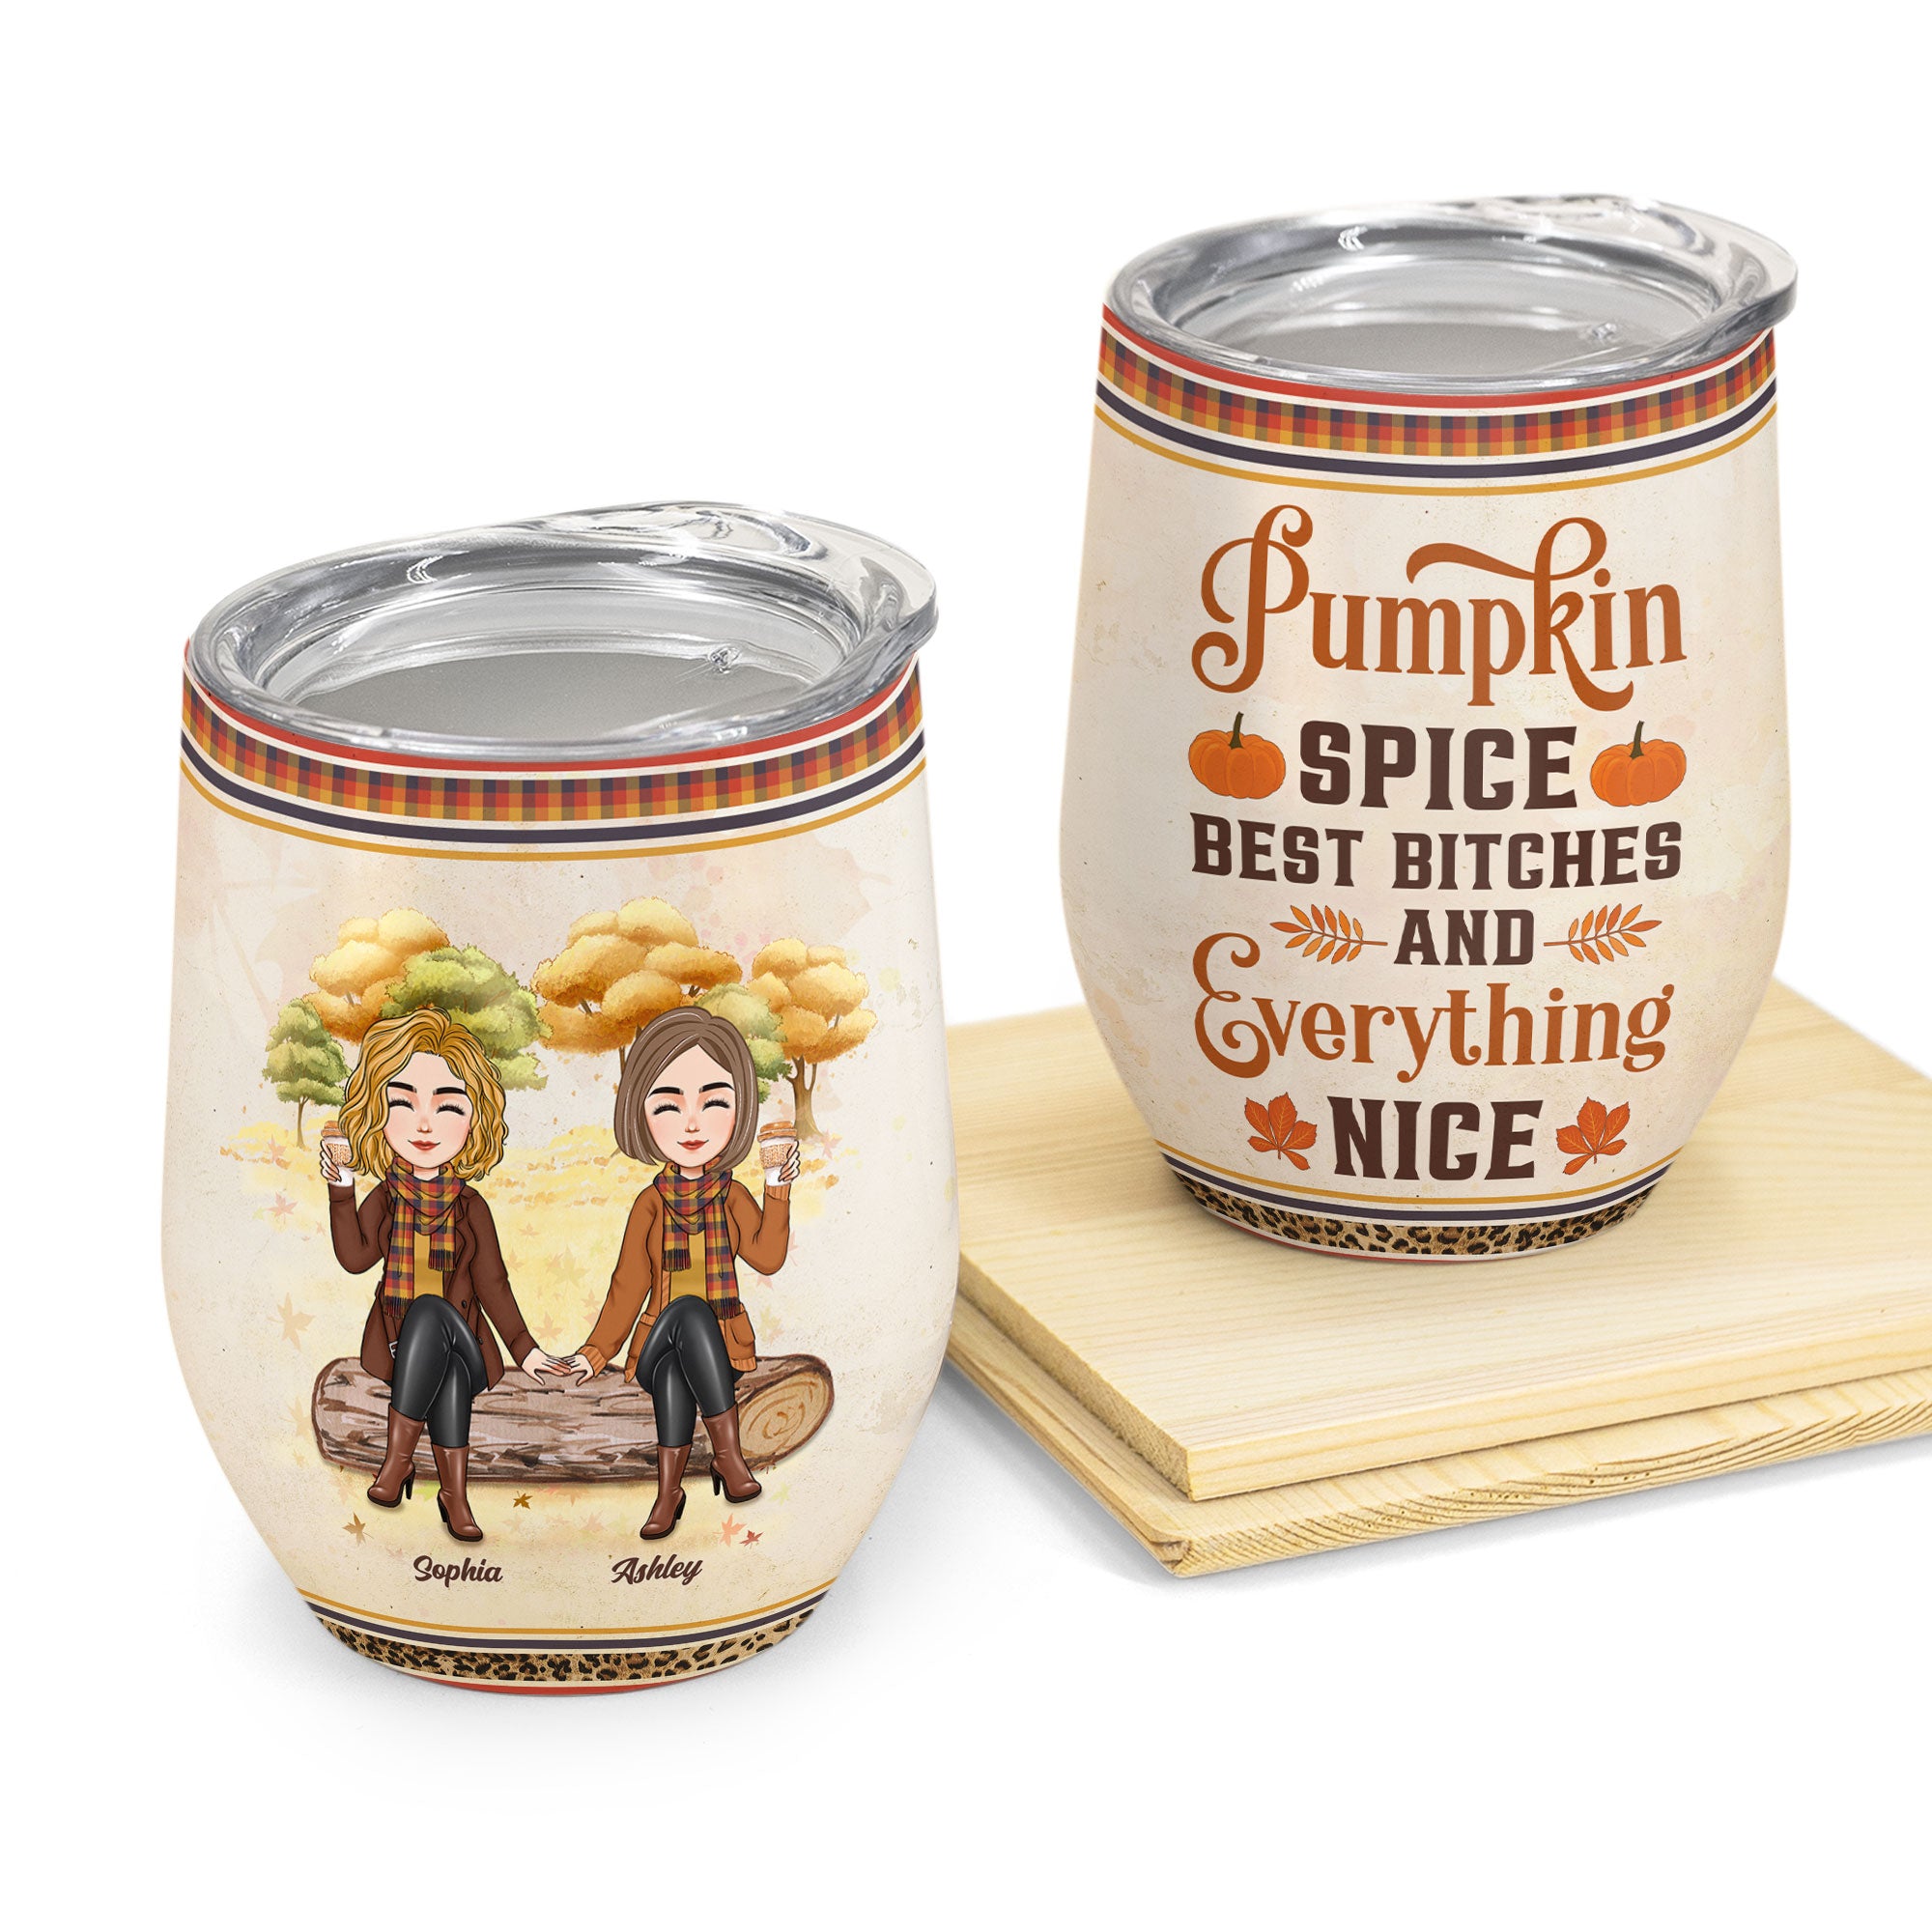 Pumpkin Spice Best Bitches & Everything Nice  - Personalized Wine Tumbler - Funny, Birthday Gift For Friends, Best Friends, Besties, Girl Gang